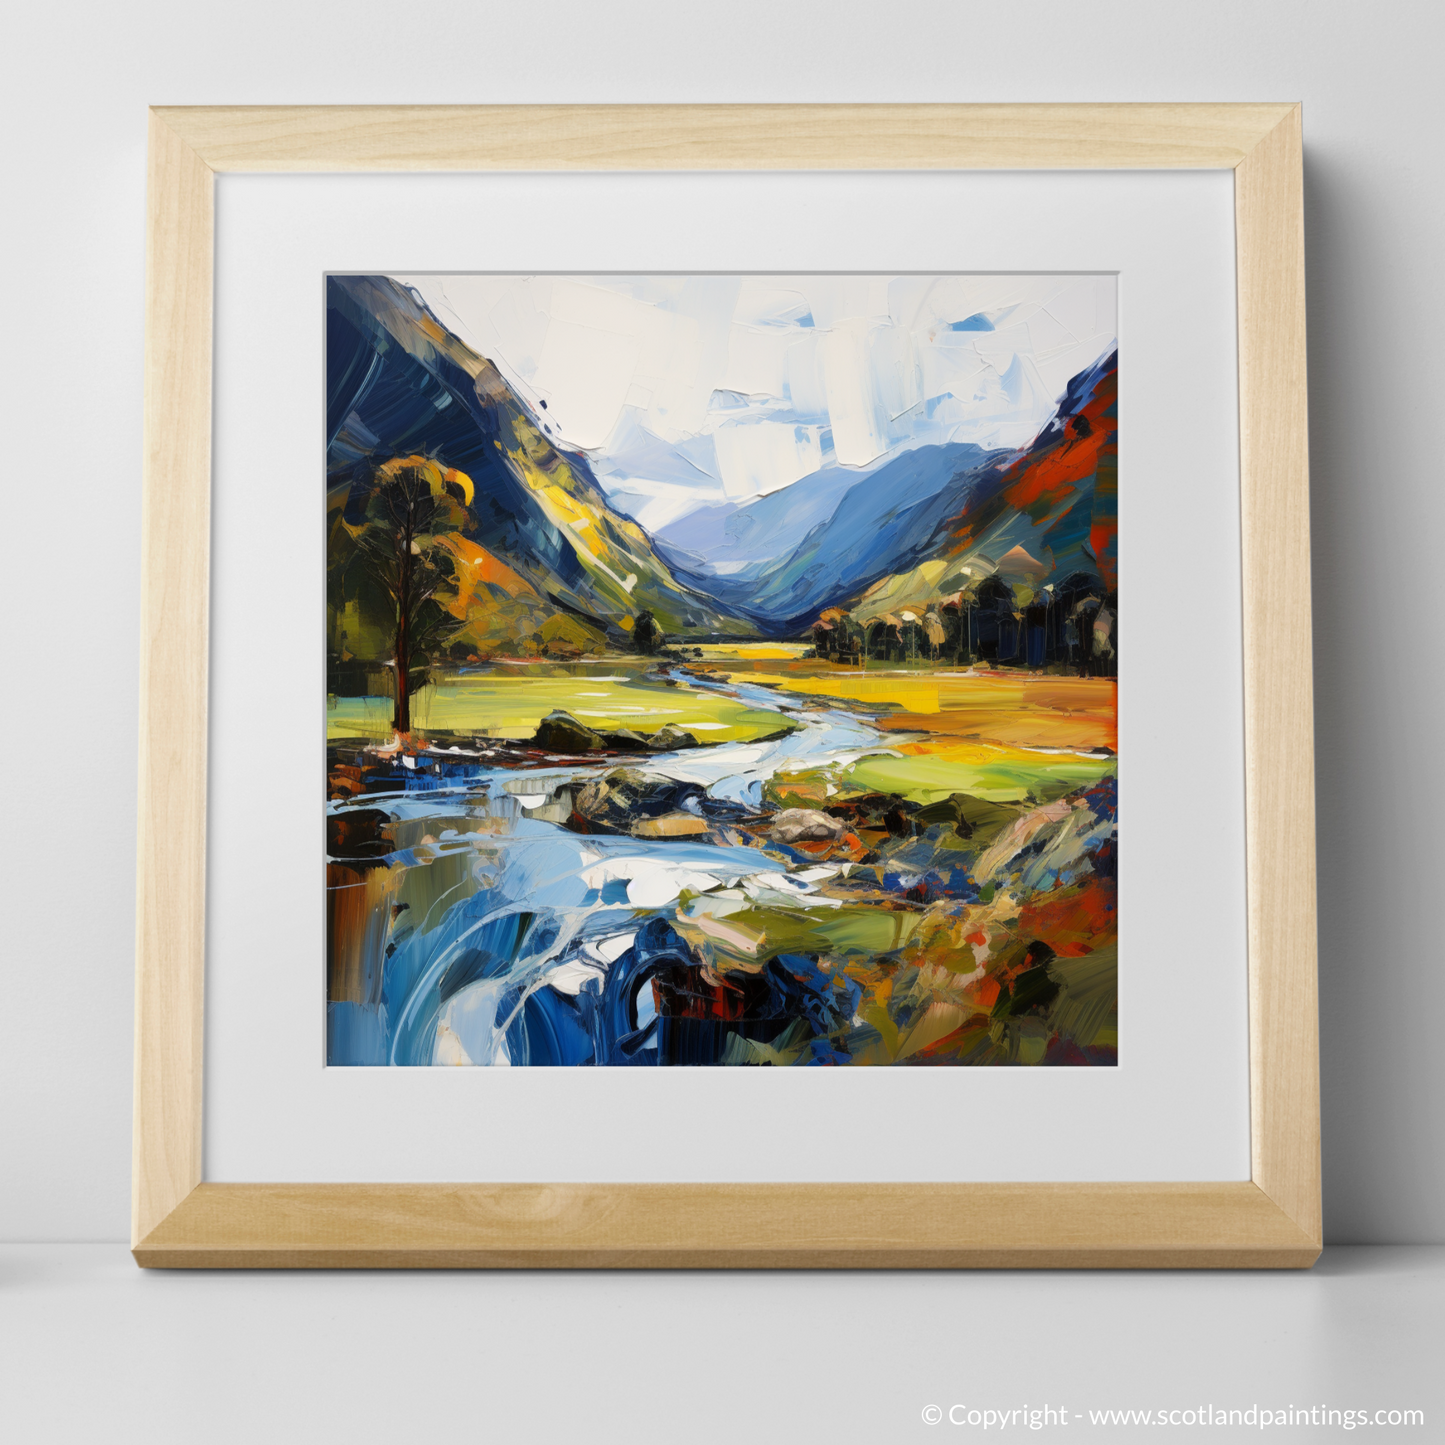 Art Print of Glen Lyon, Perthshire with a natural frame